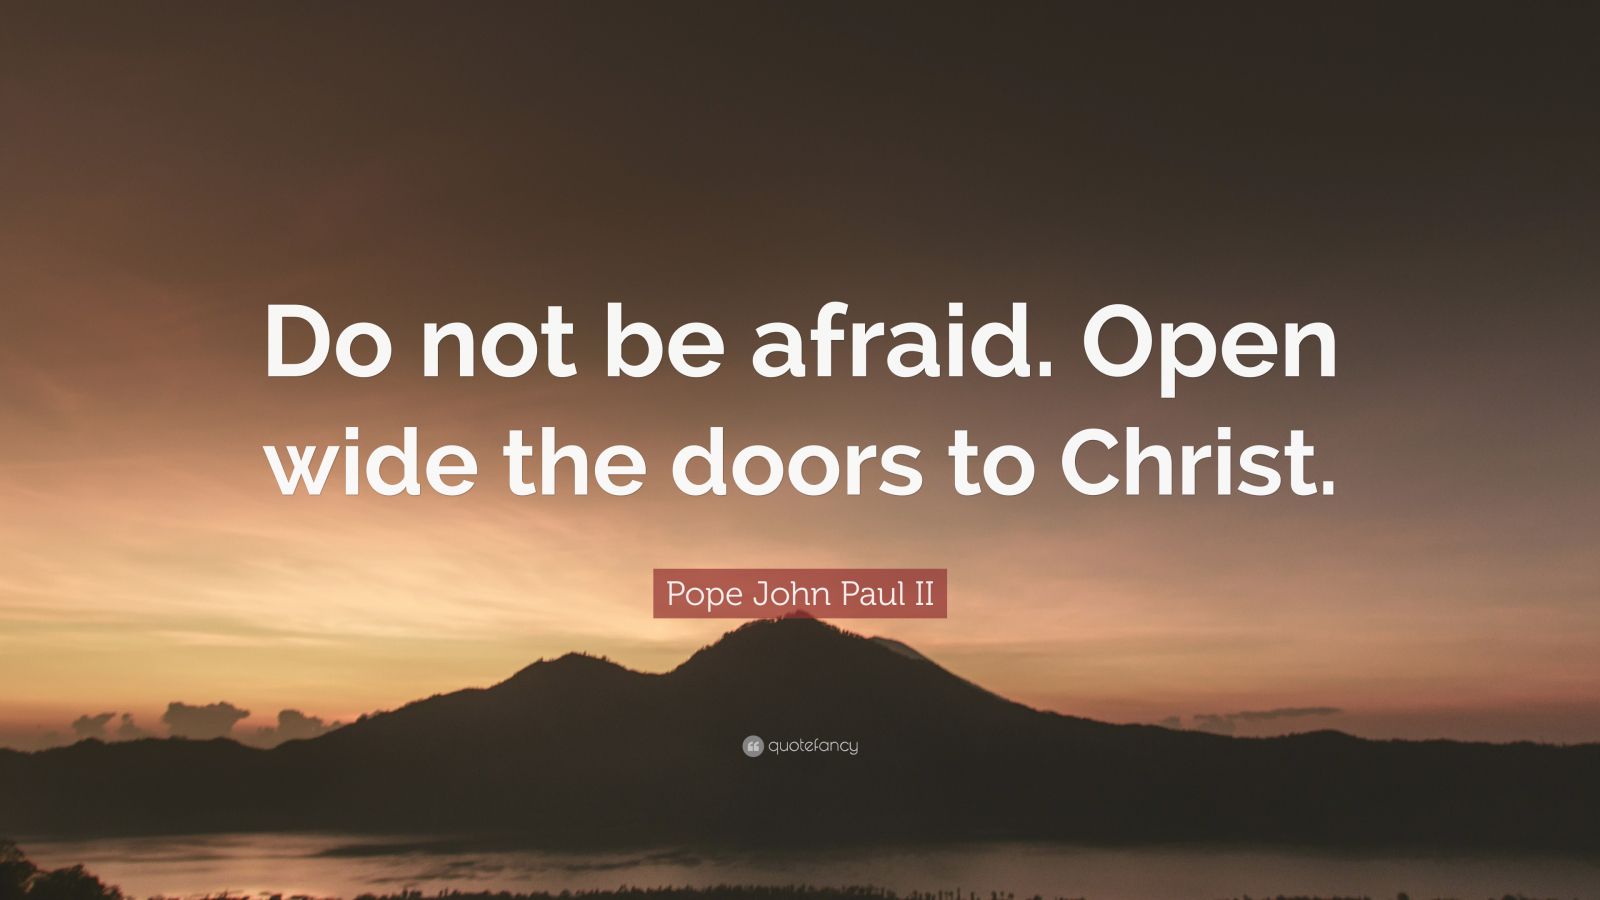 Pope John Paul II Quote: “Do not be afraid. Open wide the doors to ...